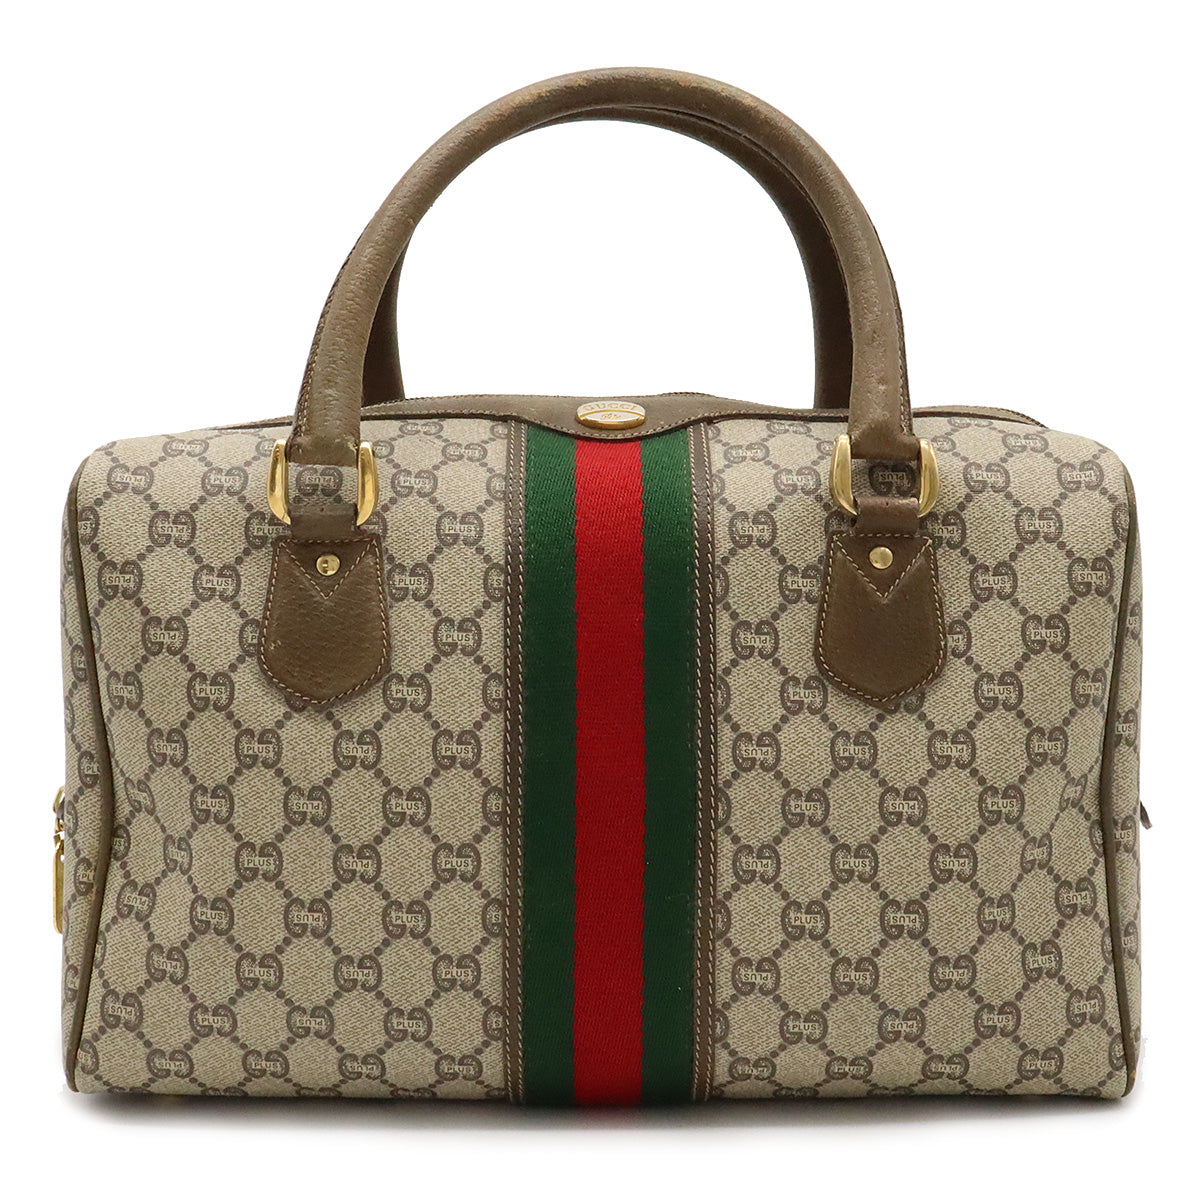 GUCCI VINTAGE BAGS, brown leather with single top handle, padlock, key and  purse, iconic green and red decorations, 33cm x 22cm H x 15cm and another  brown suede with gold tone hardware